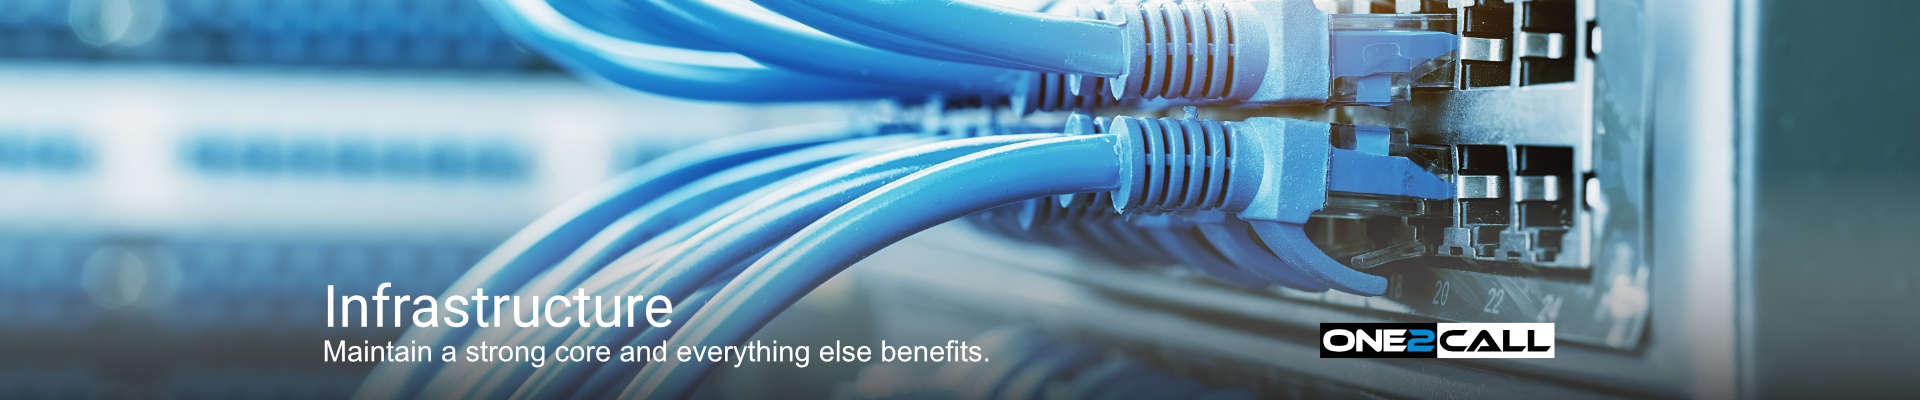 Infrastructure - Maintain a strong core and everything else benefits.